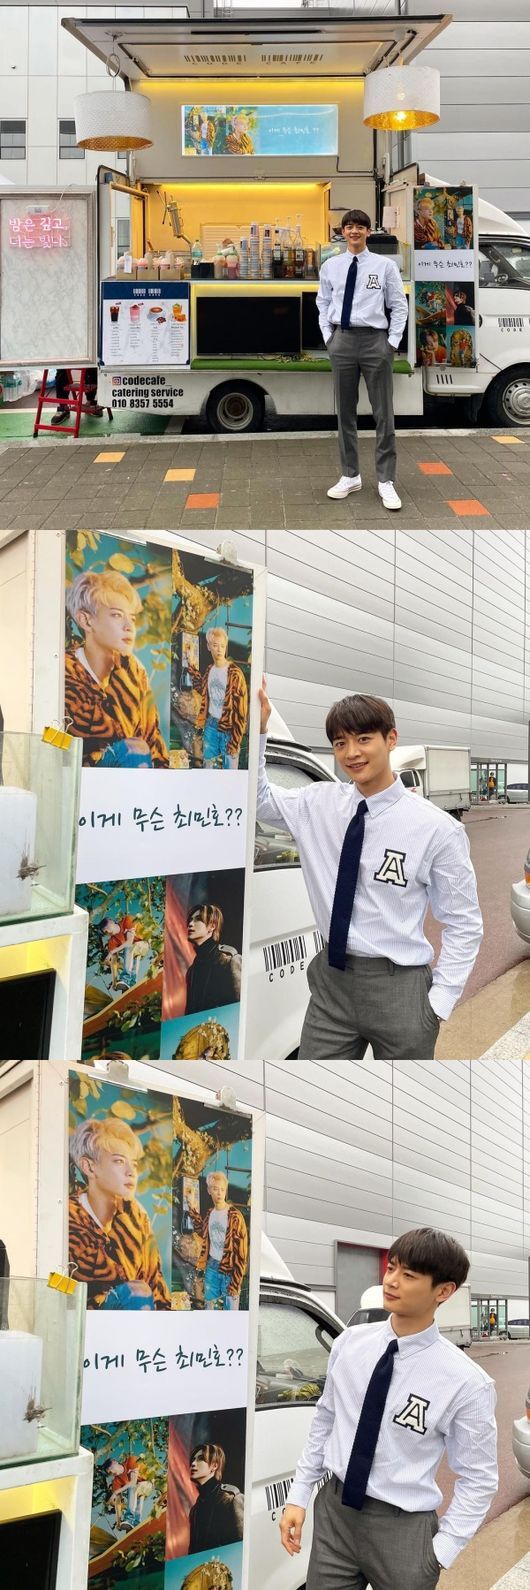 SHINee Minho thanked Lee Tae-min for sending Coffee or Tea.On the afternoon of the 4th, Minho posted three photos on his Instagram with the message Choi Min-ho! Lee Tae-min, Thank you for your strength!In the photo, Minho is showing off his warmth by taking various poses in front of Coffee or Tea sent by Lee Tae-min.The phrase What is Choi Min-ho? In Coffee or Tea also attracts attention.In Minhos photo, fans are cheering for the friendship of the two with comments such as Lee Tae-min sense jackpot, SHINee is shining, Why are you so cute?, My youngest child, warm brother.Meanwhile, SHINee, which Minho belongs to, released its 7th album this April and its repackaged Atlantis, Lee Tae-min joined the military on May 31.minho SNS